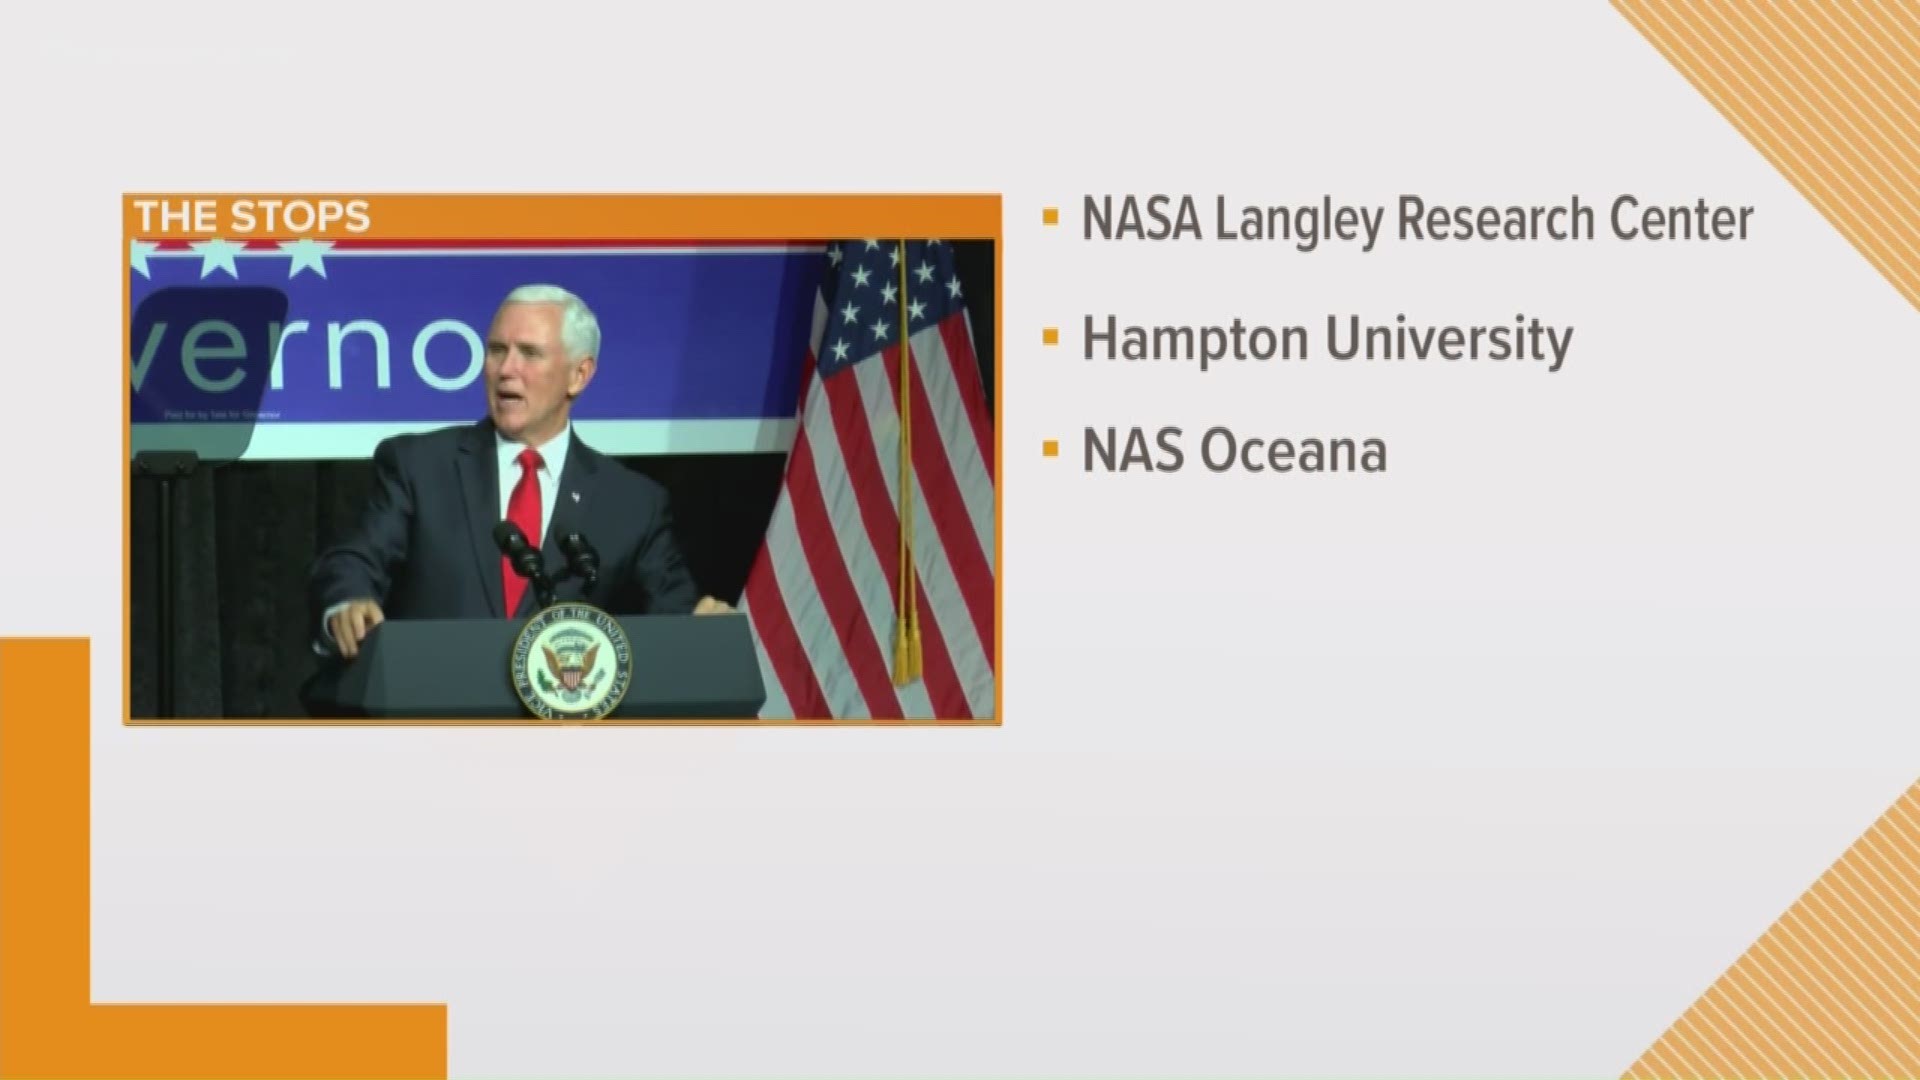 Vice President Mike Pence is back in Hampton Roads on Wednesday, Feb. 19.  He'll make stops at NASA Langley, Hampton University and NAS Oceana in Virginia Beach.